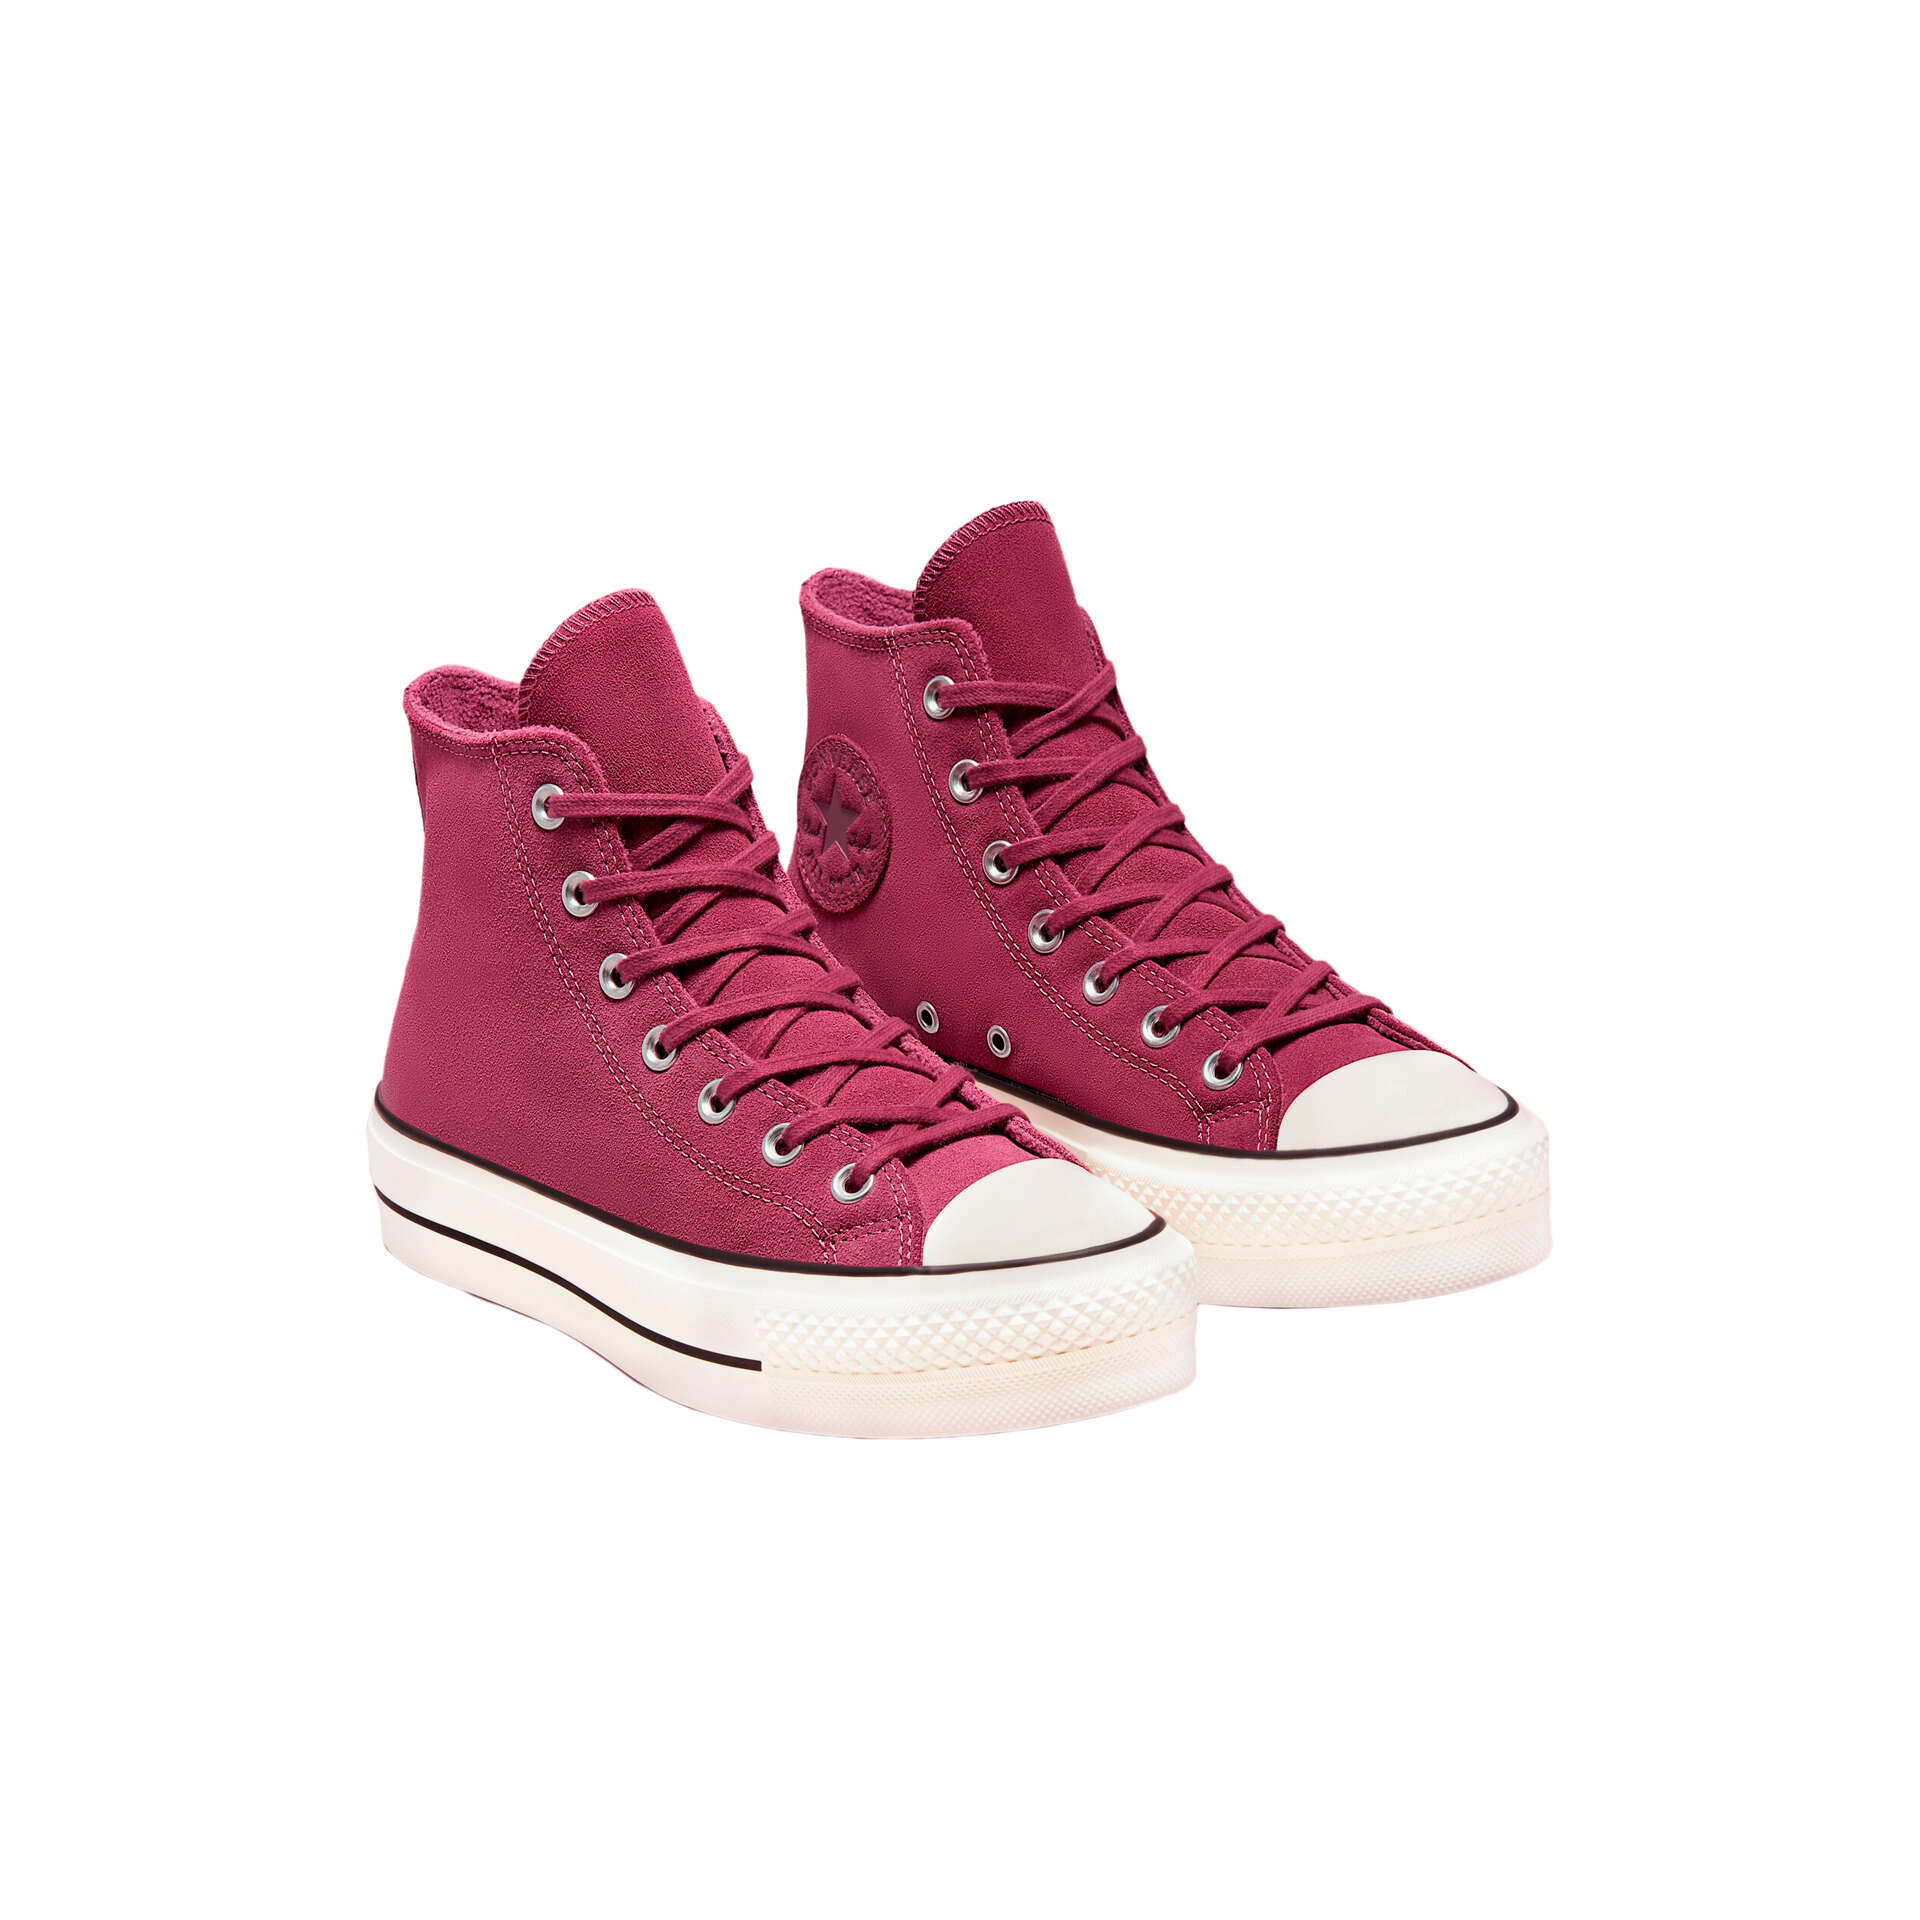 Converse Taylor All Star Lined granate zapatillas mujer | Dooers Sneakers